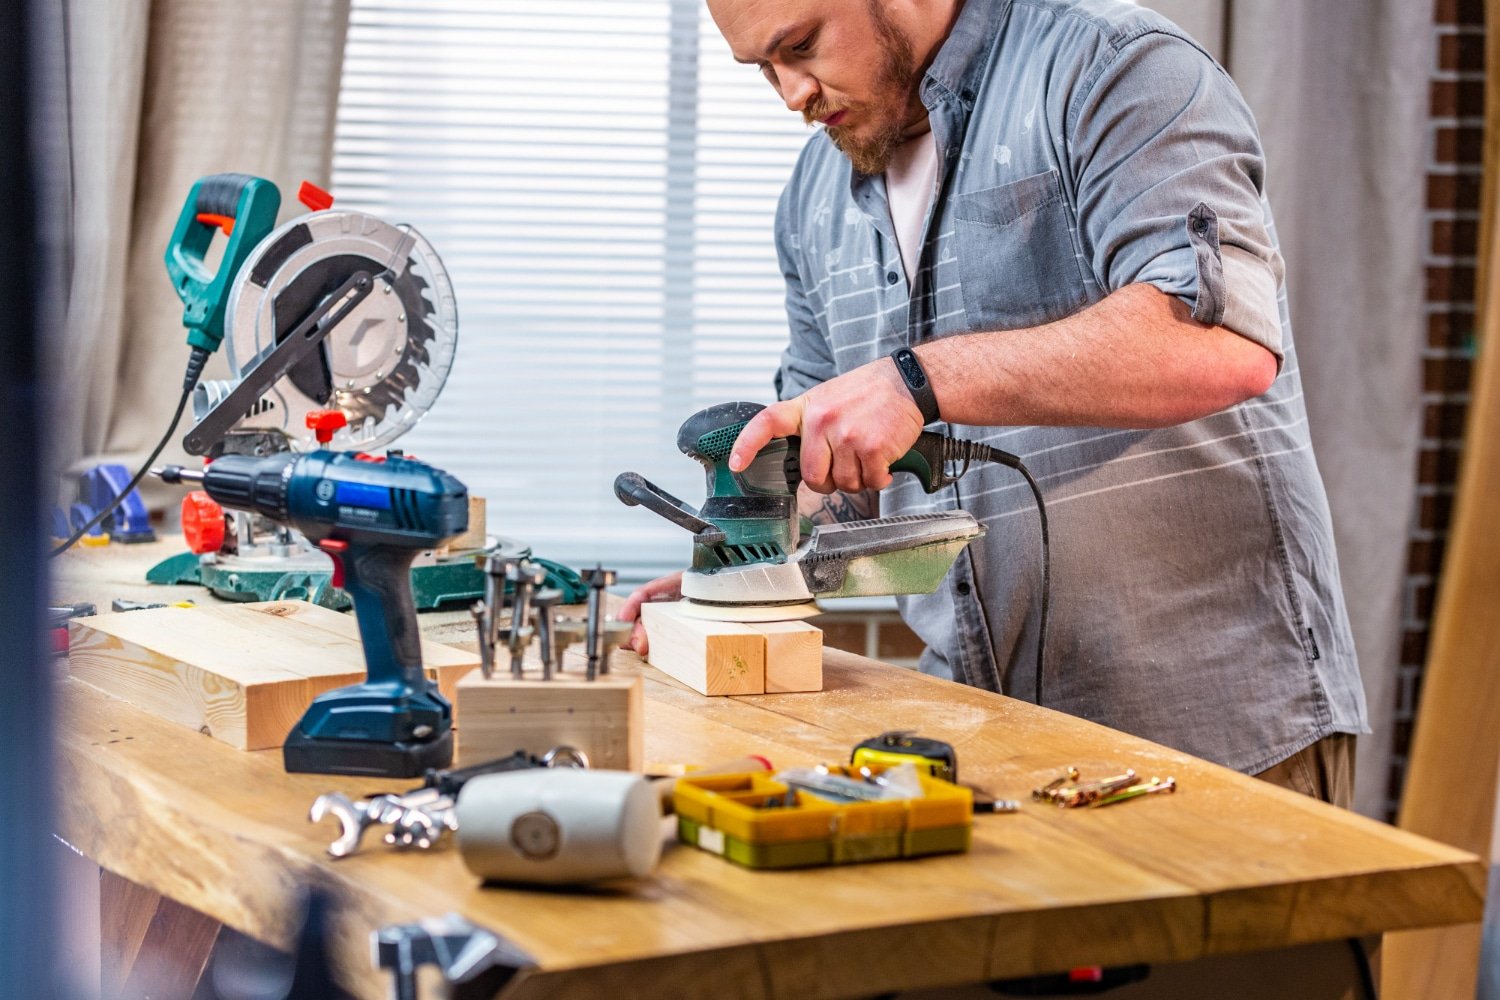 Ryobi UK: Power Tools for DIY Enthusiasts and Professionals